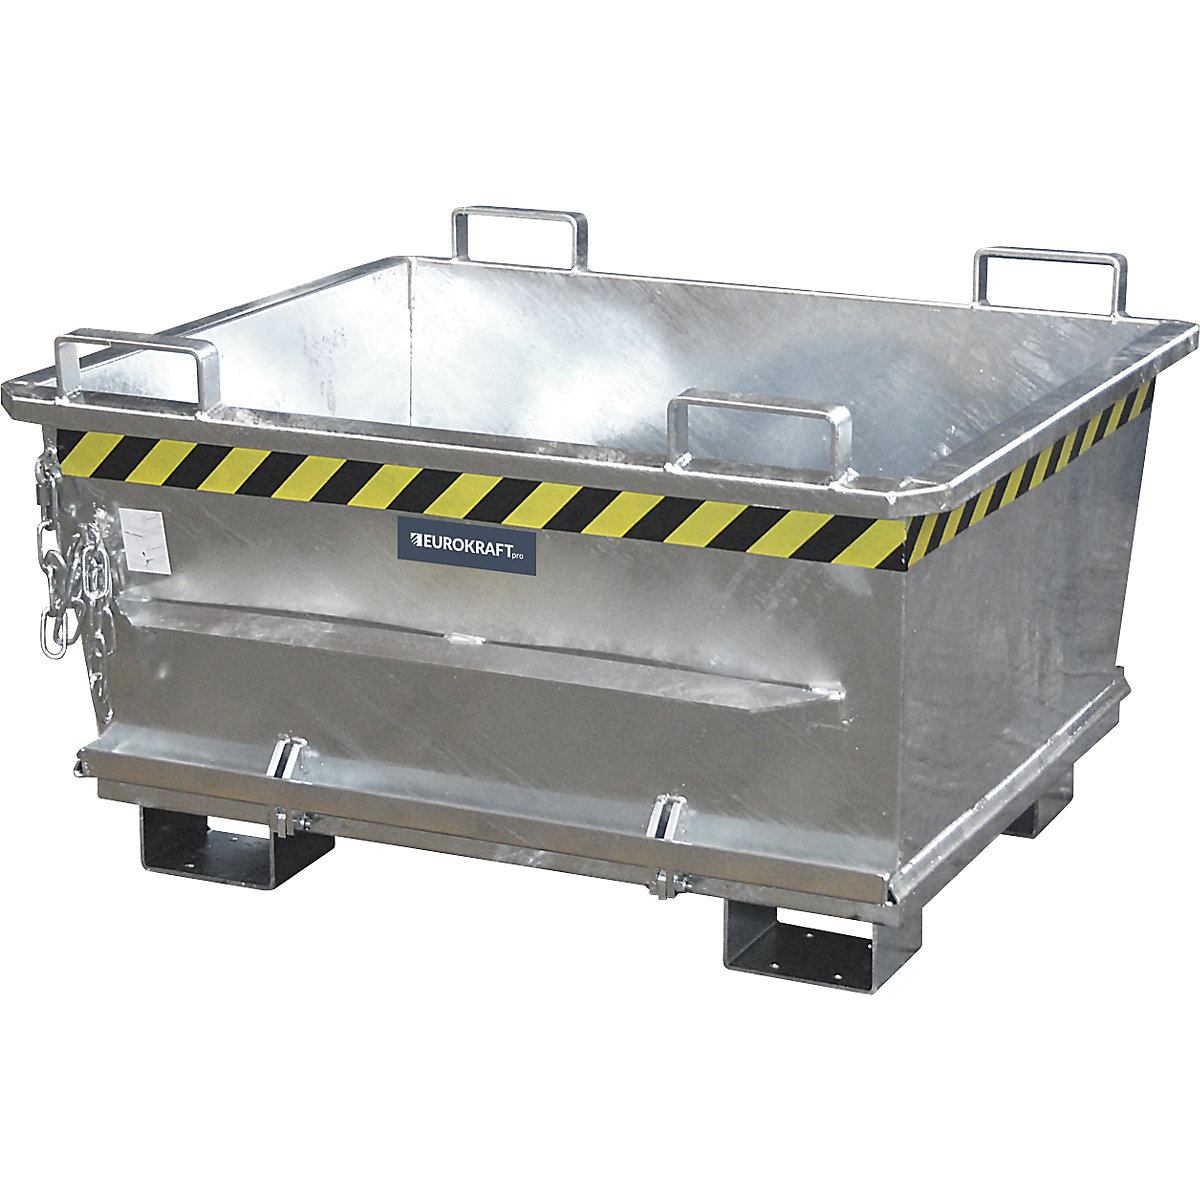 Conical hinged bottom skip – eurokraft pro, capacity 0.5 m³, max. load 1000 kg, hot dip galvanised in accordance with EN ISO 1461-15